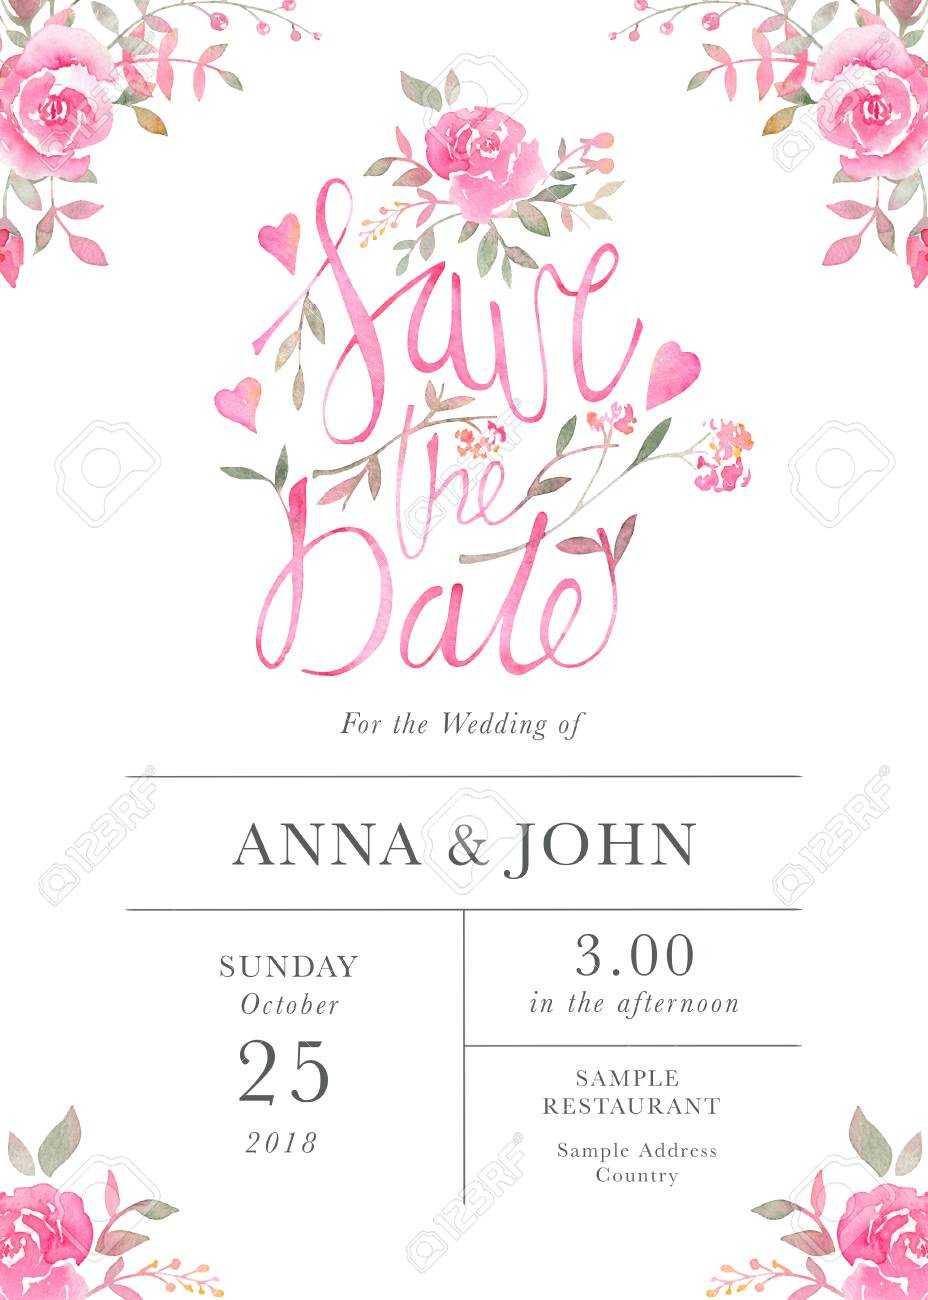 Wedding Invitation Card Template With Watercolor Rose Flowers Inside Sample Wedding Invitation Cards Templates